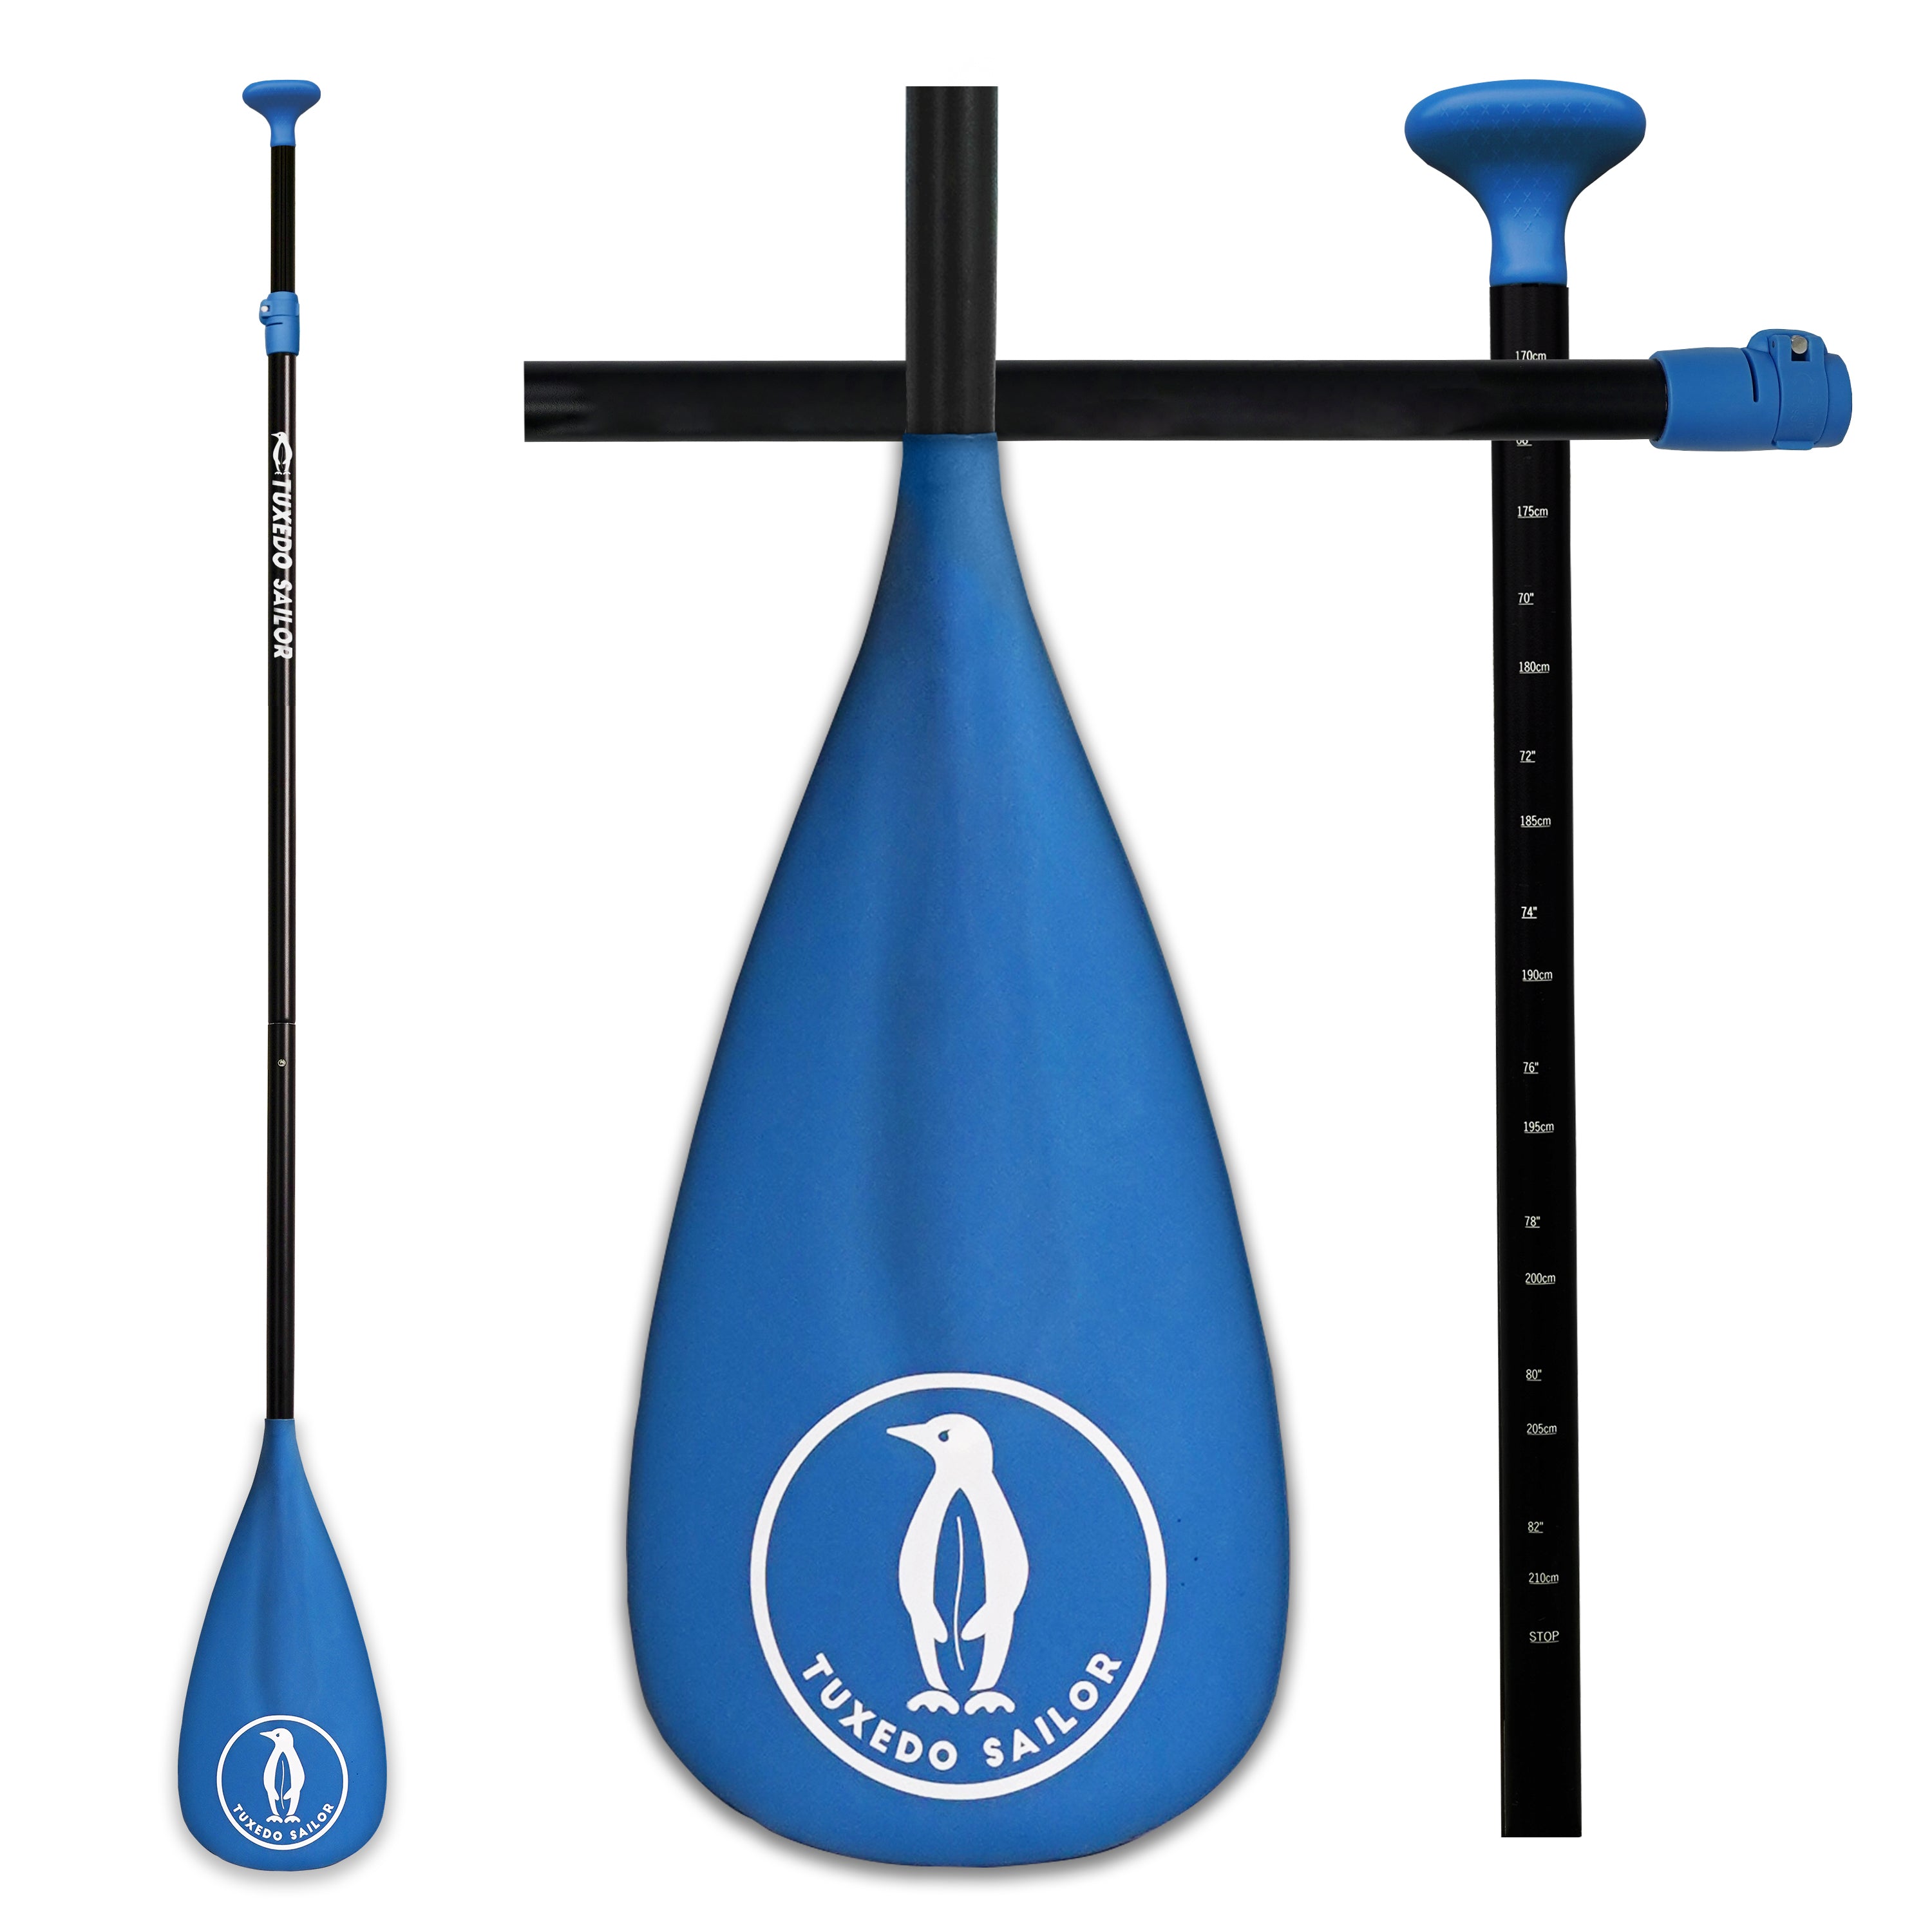 FunWater SUP Paddles - Adjustable Stand Up Paddle 3 Piece Floating Alloy Portable Paddle Board Paddles - Lightweight & Floating oars - Durable and Packable - Efficient Padding